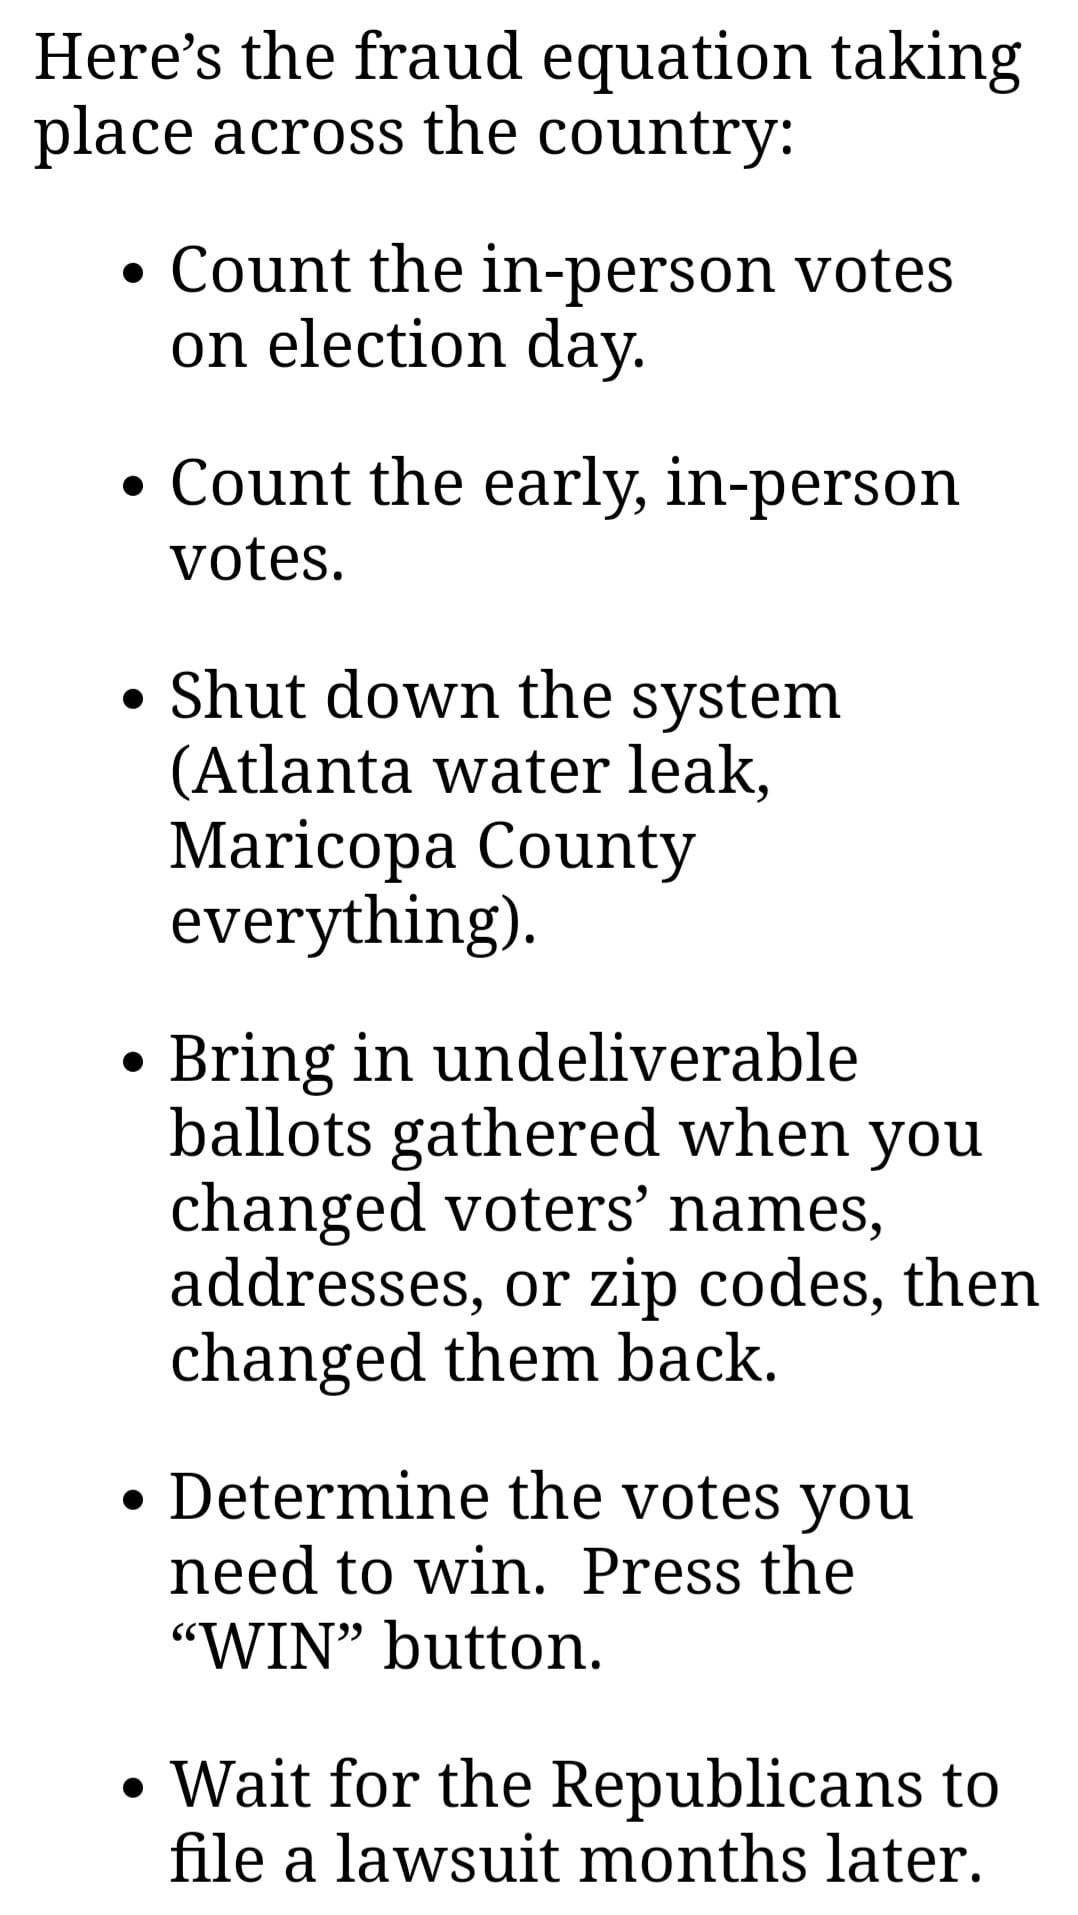 May be an image of text that says 'Here's the fraud equation taking place across the country: •Count the in-person votes on election day. Count the early, in-person votes. Shut down the system (Atlanta water leak, Maricopa County everything). Bring in undeliverable ballots gathered when you changed voters' names, addresses, or zip codes, then changed them back. Determine the votes you need to win. Press the "WIN" button. Wait for the Republicans to file a lawsuit months later.'